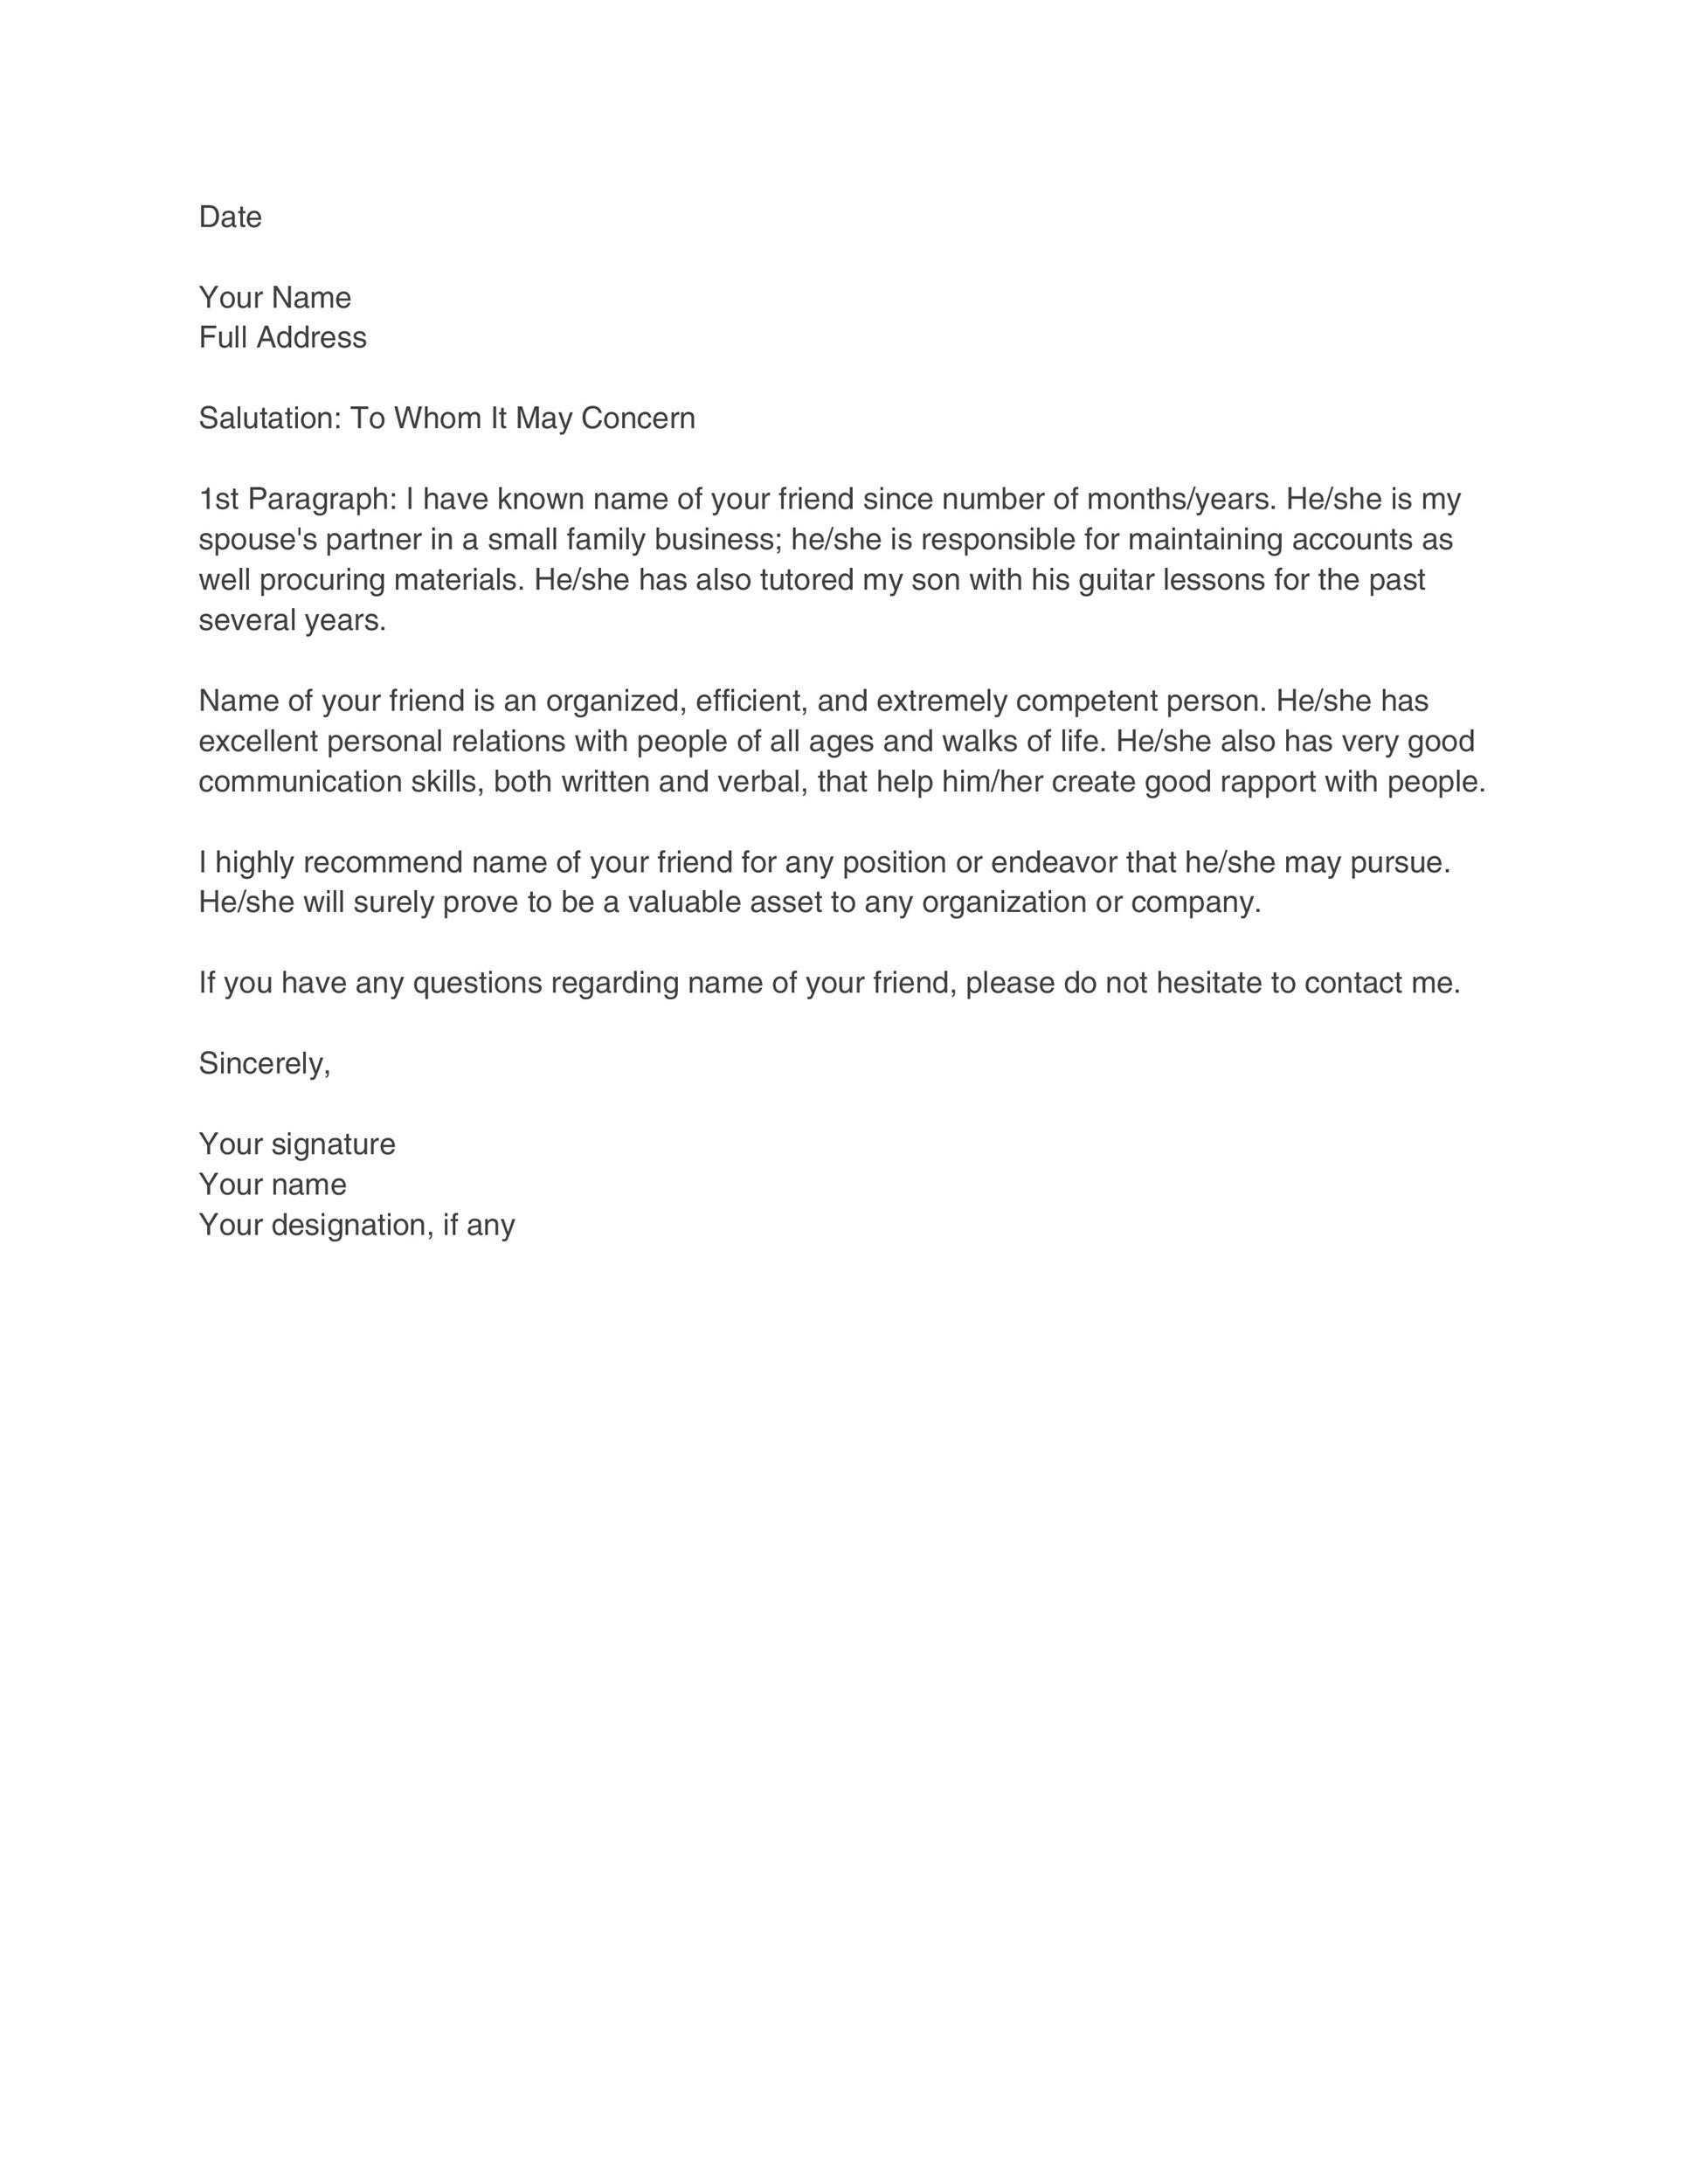 Sample Letter Of Recommendation For A Friend from templatelab.com